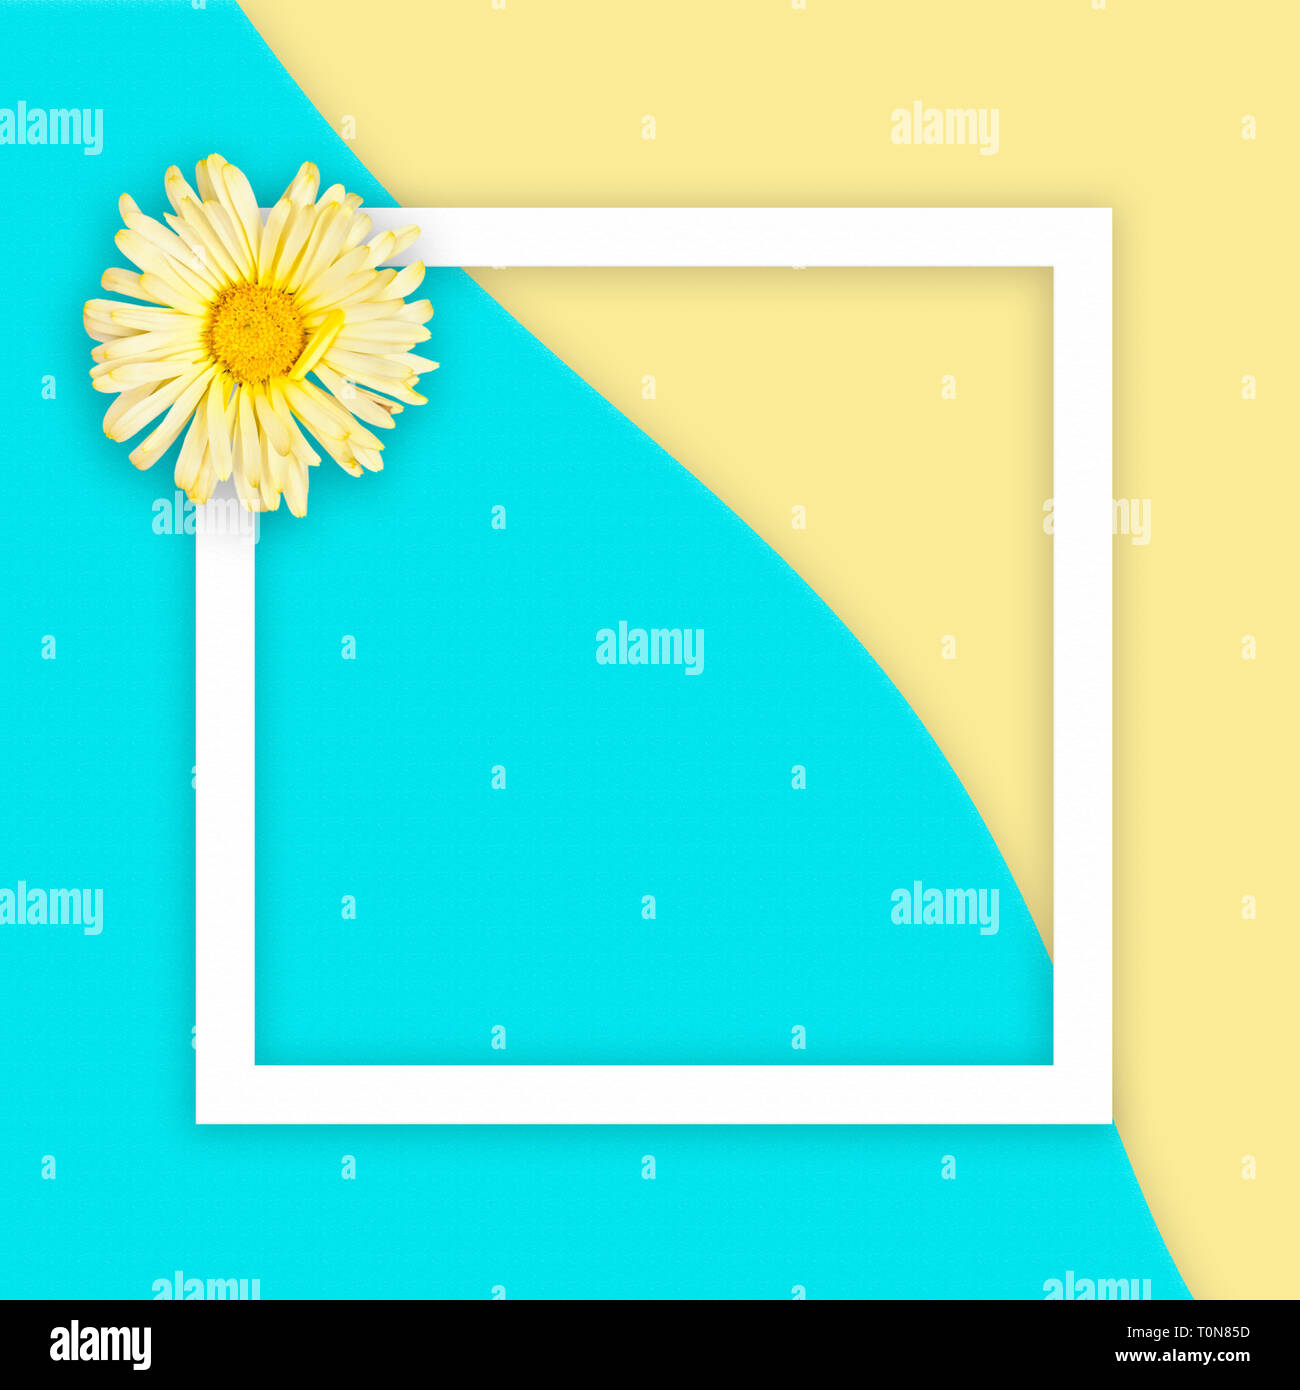 Yellow daisy on abstract sea and sand background with white flat frame square. Flat lay Stock Photo